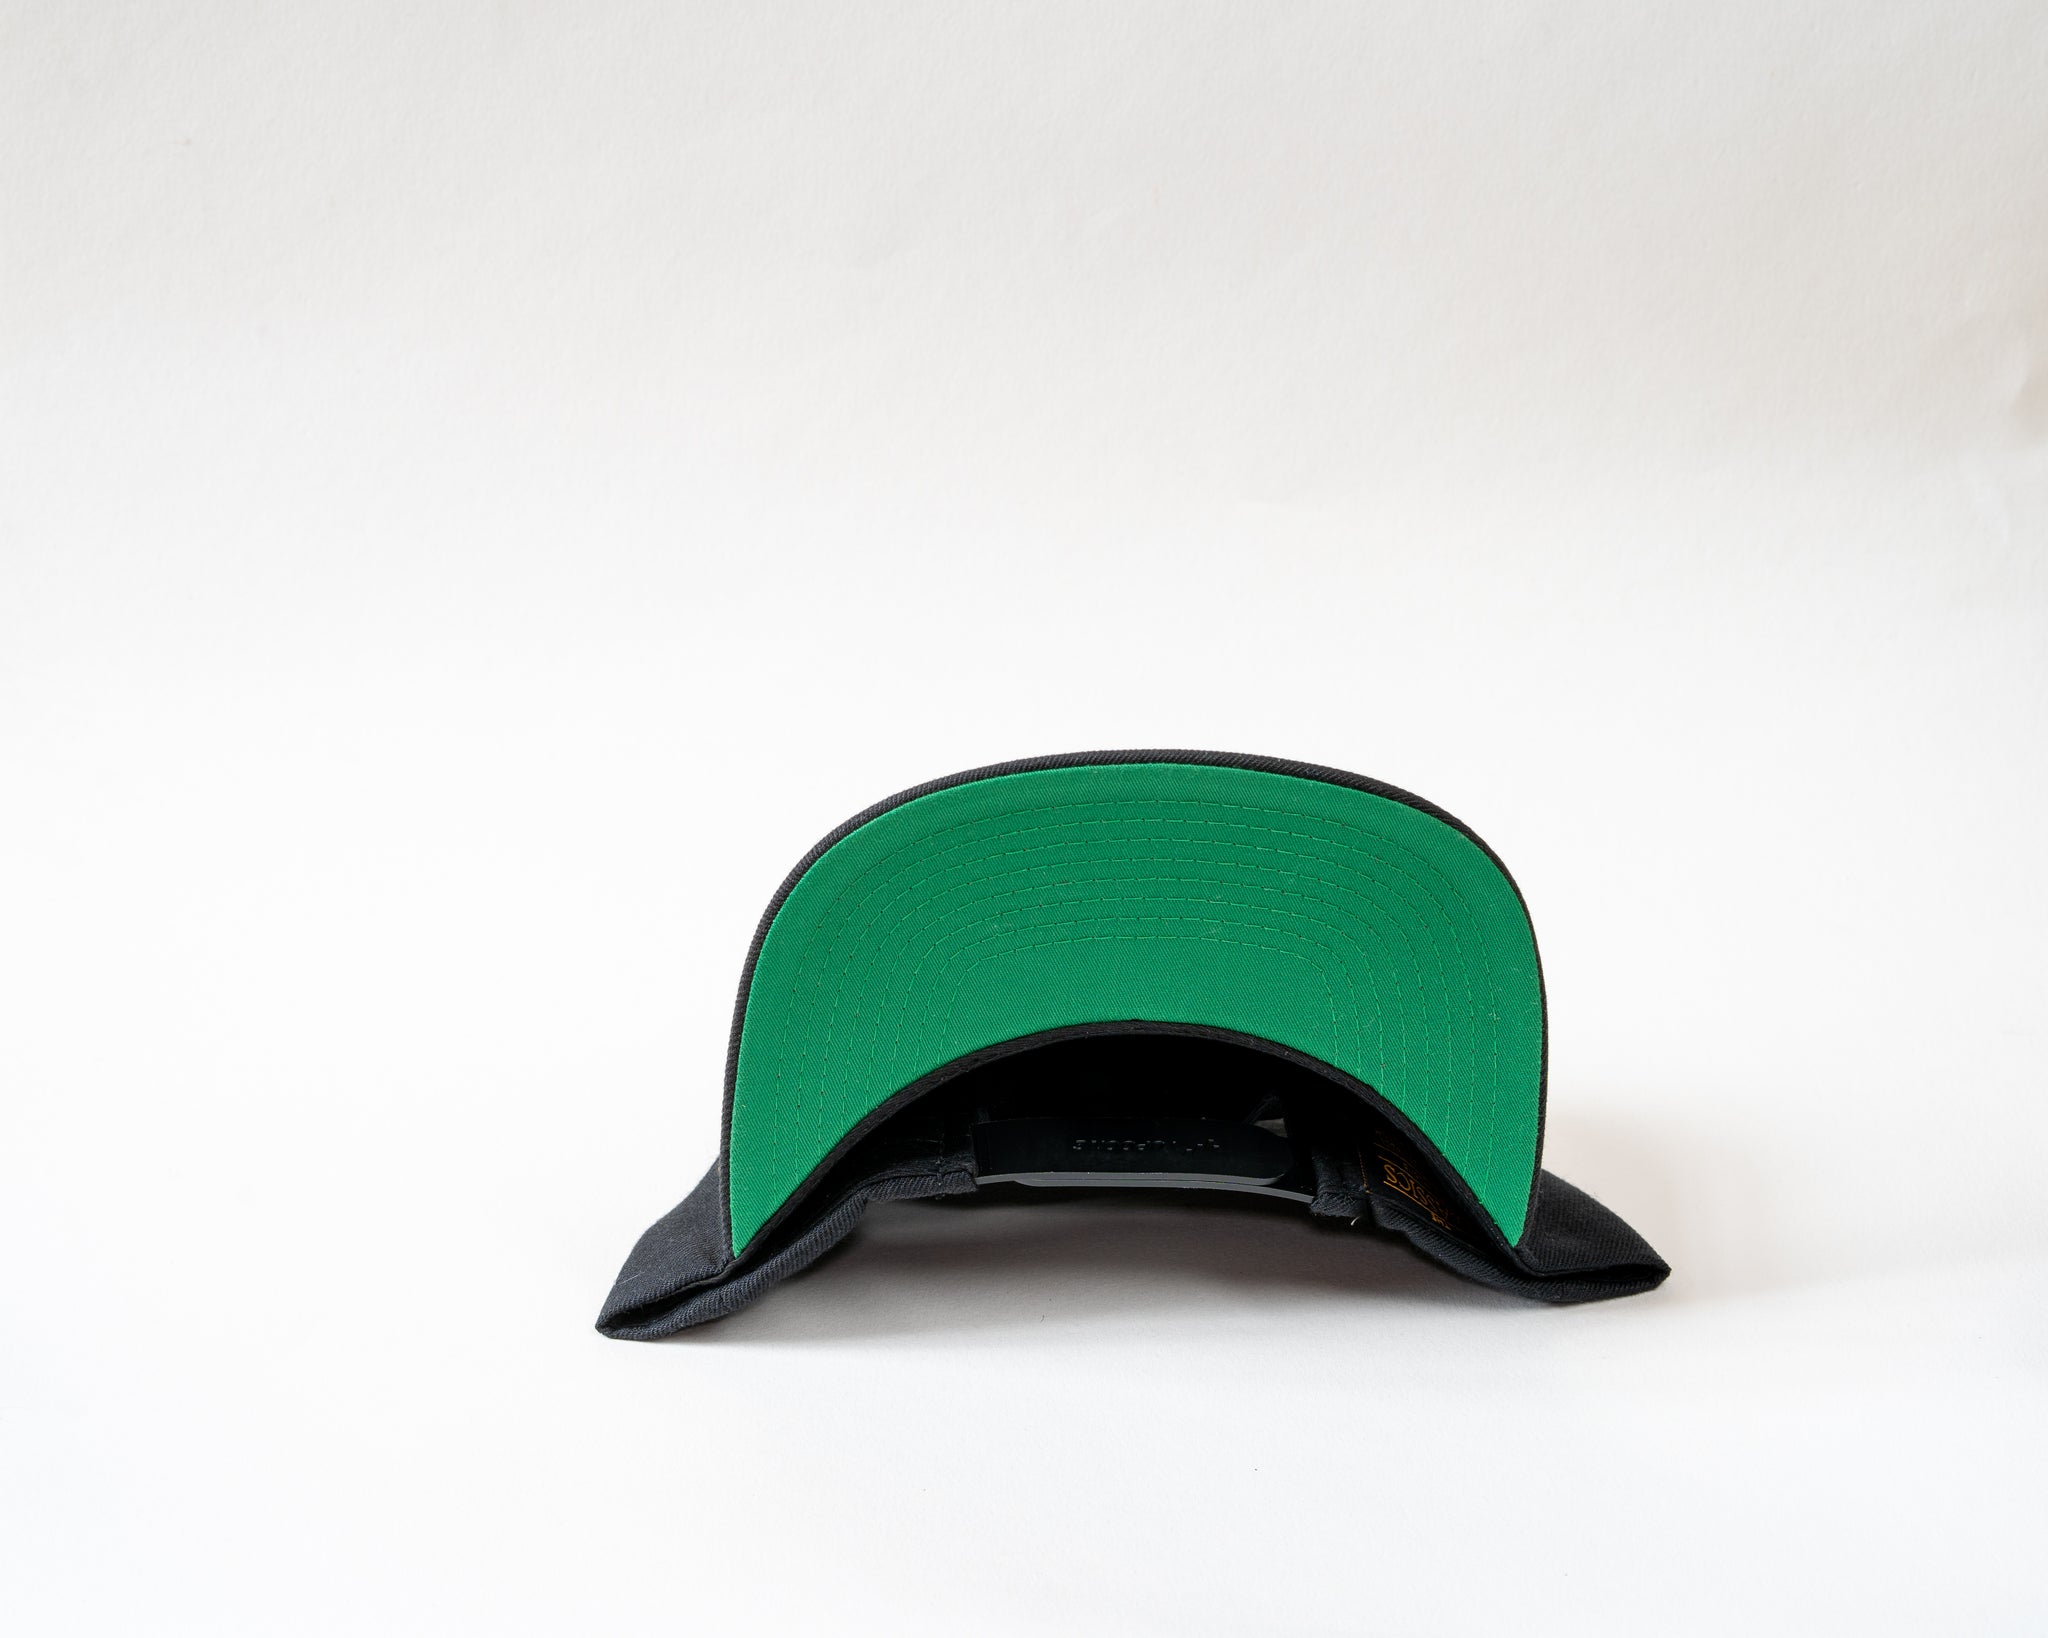 Jam Snapback cap showcasing green base sitting on a white background cool product photography